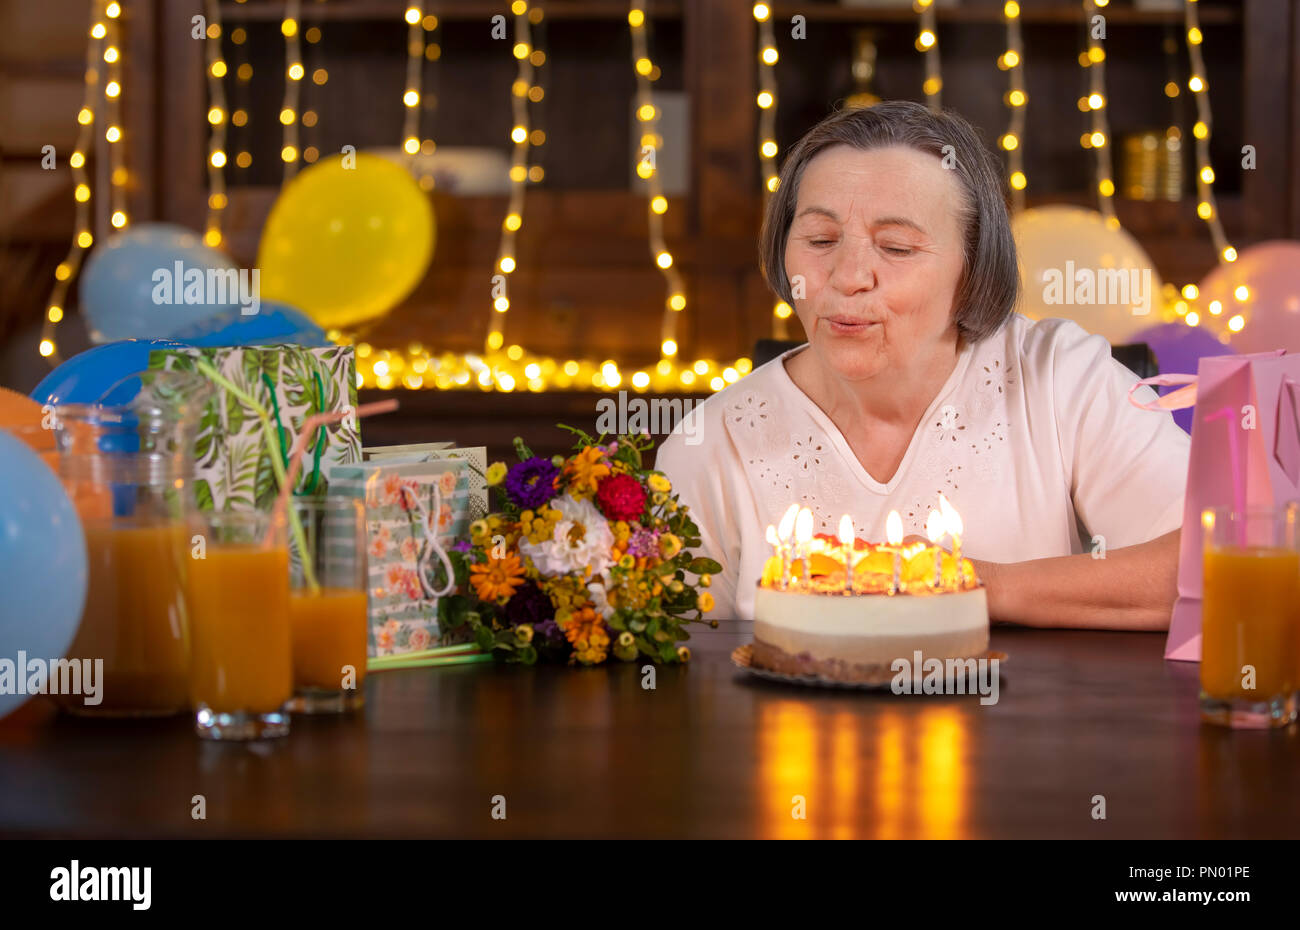 Elderly woman celebrating her anniversary at home. Senior woman blowing candles on birthday cake. Celebrating aging concept. Stock Photo